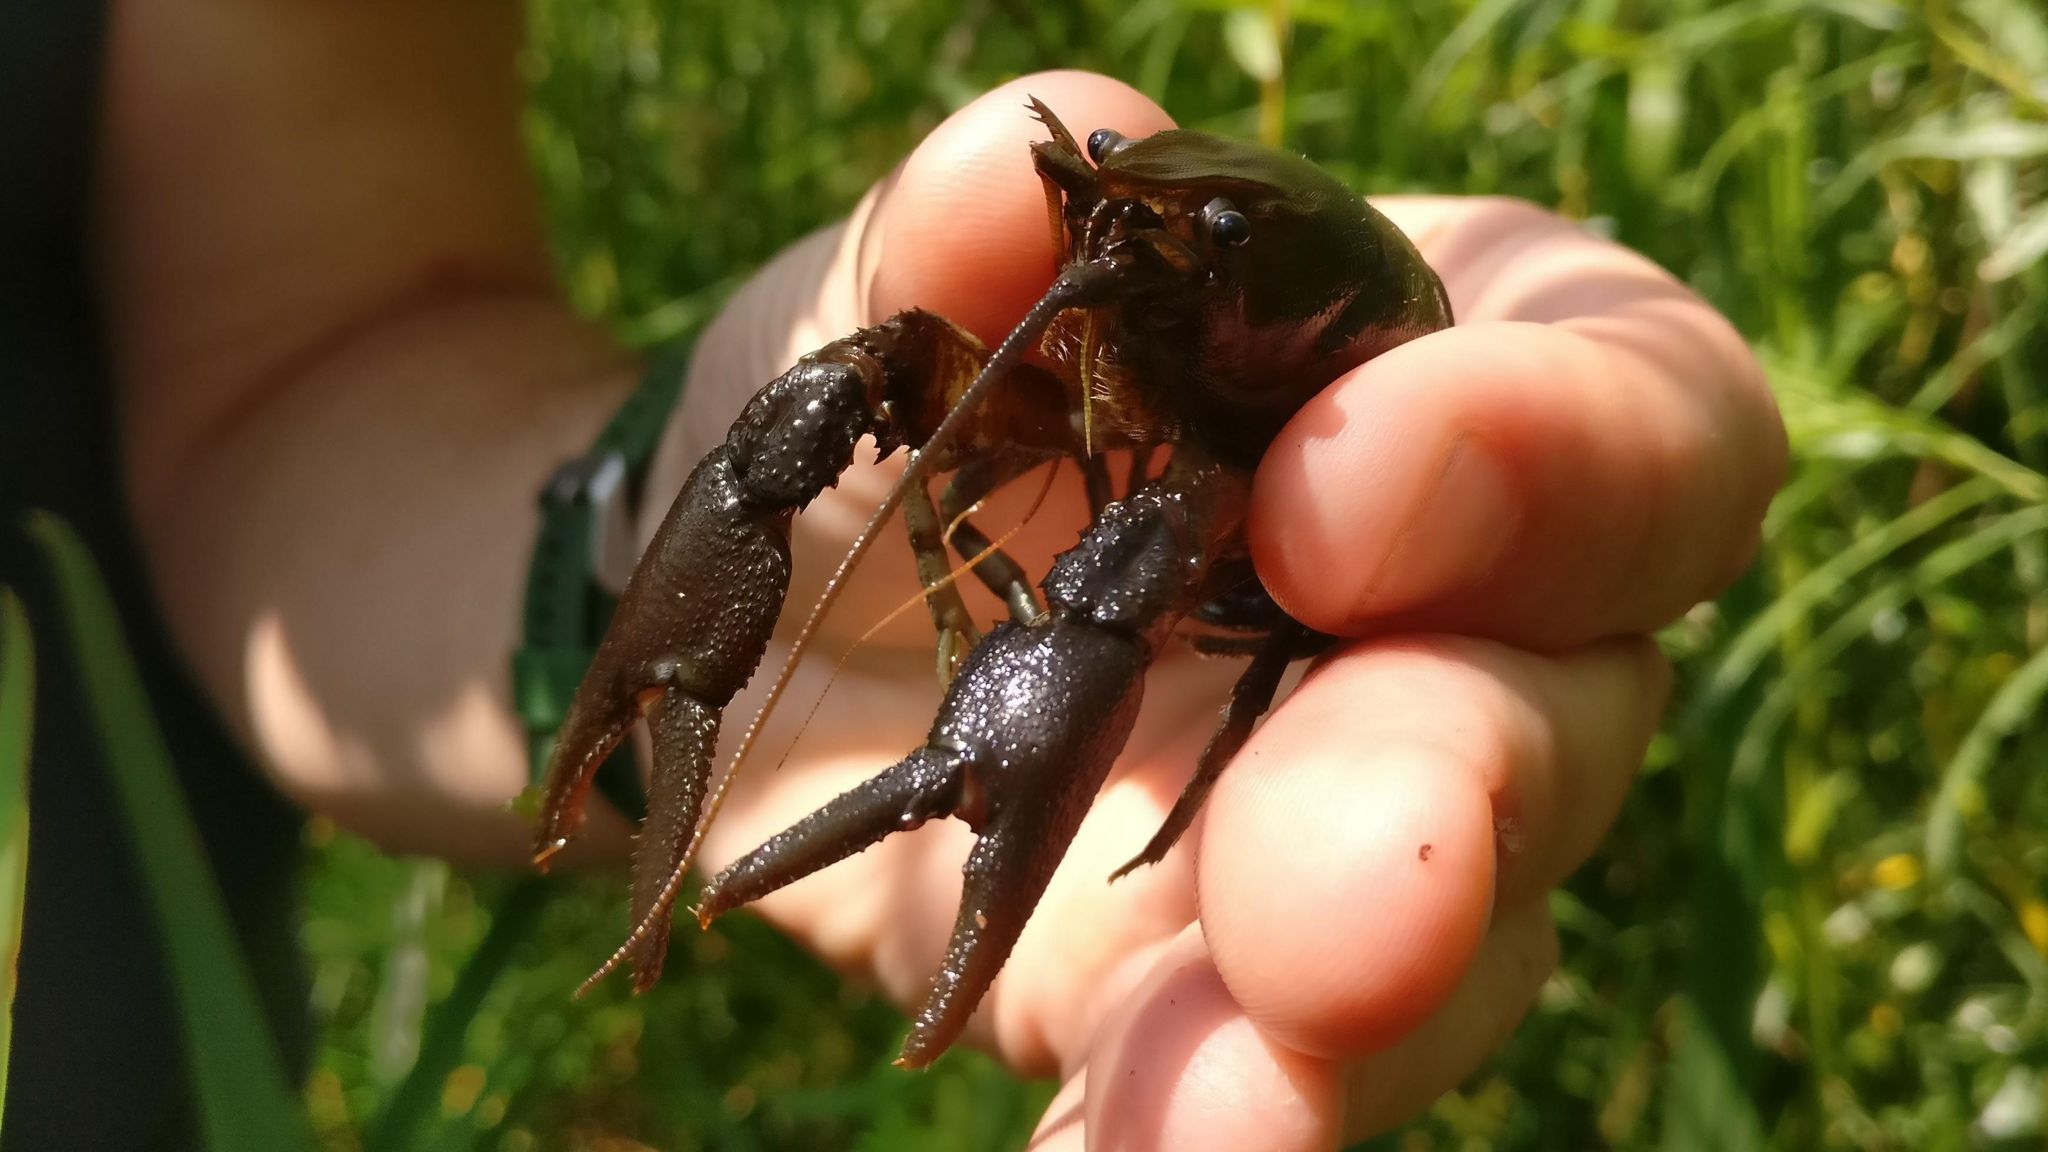 A close-up picture of a person's hand, holding a small, dark brown crayfish between their thumb and forefinger. 